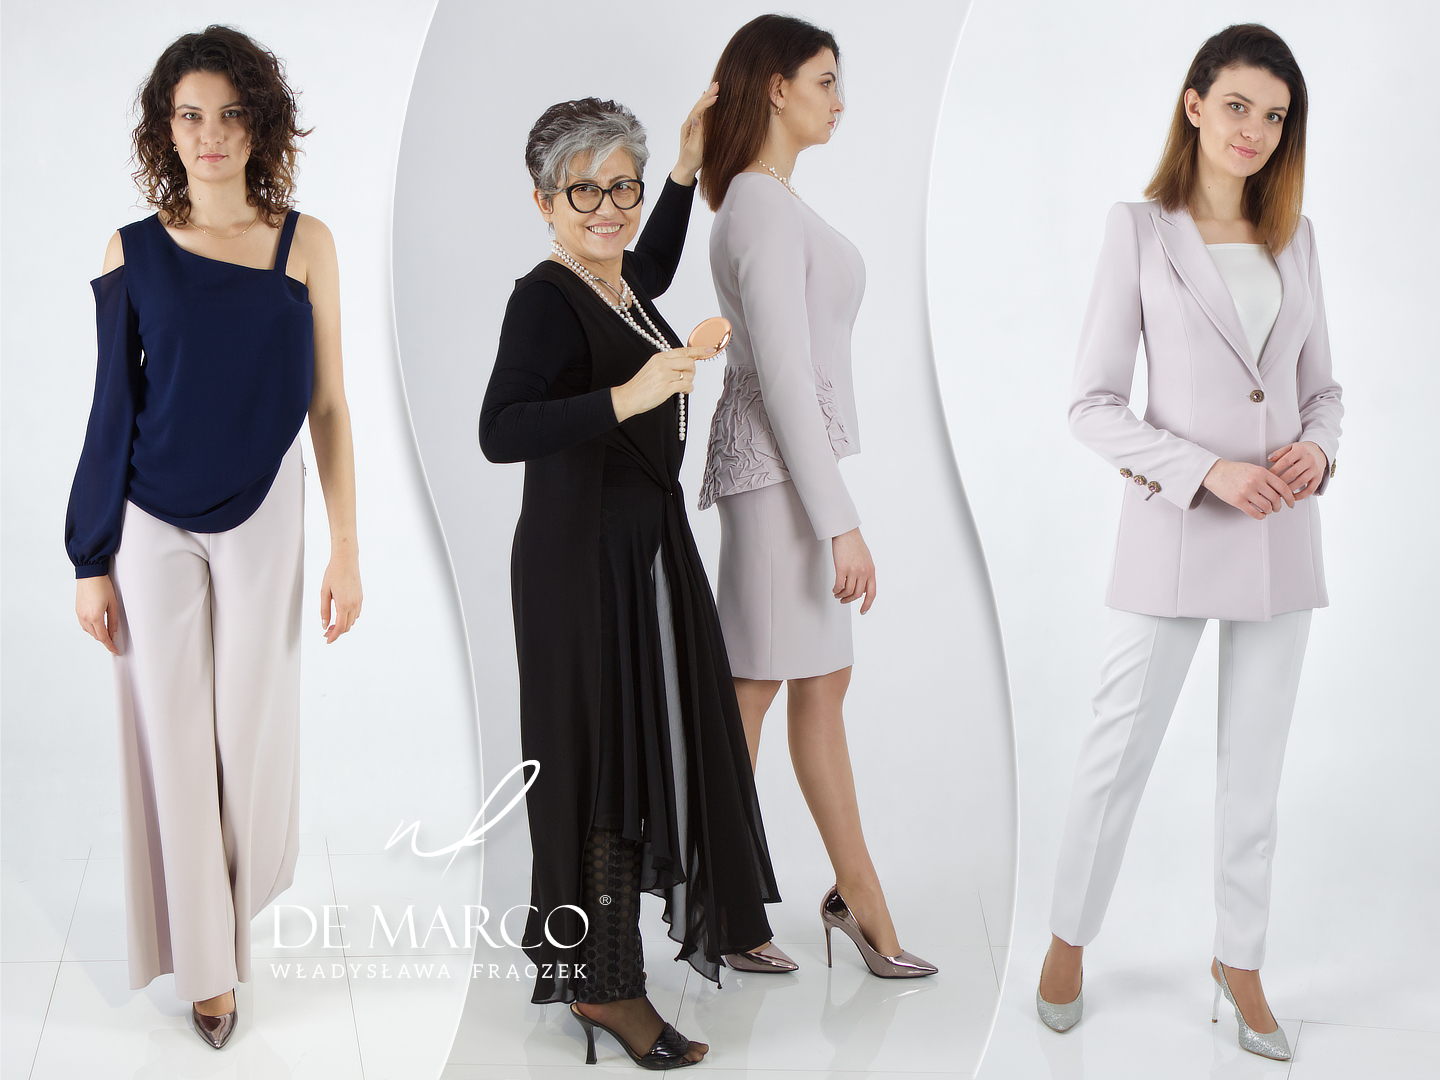 Polish exclusive women’s clothing De Marco luxury made-to-measure clothing online